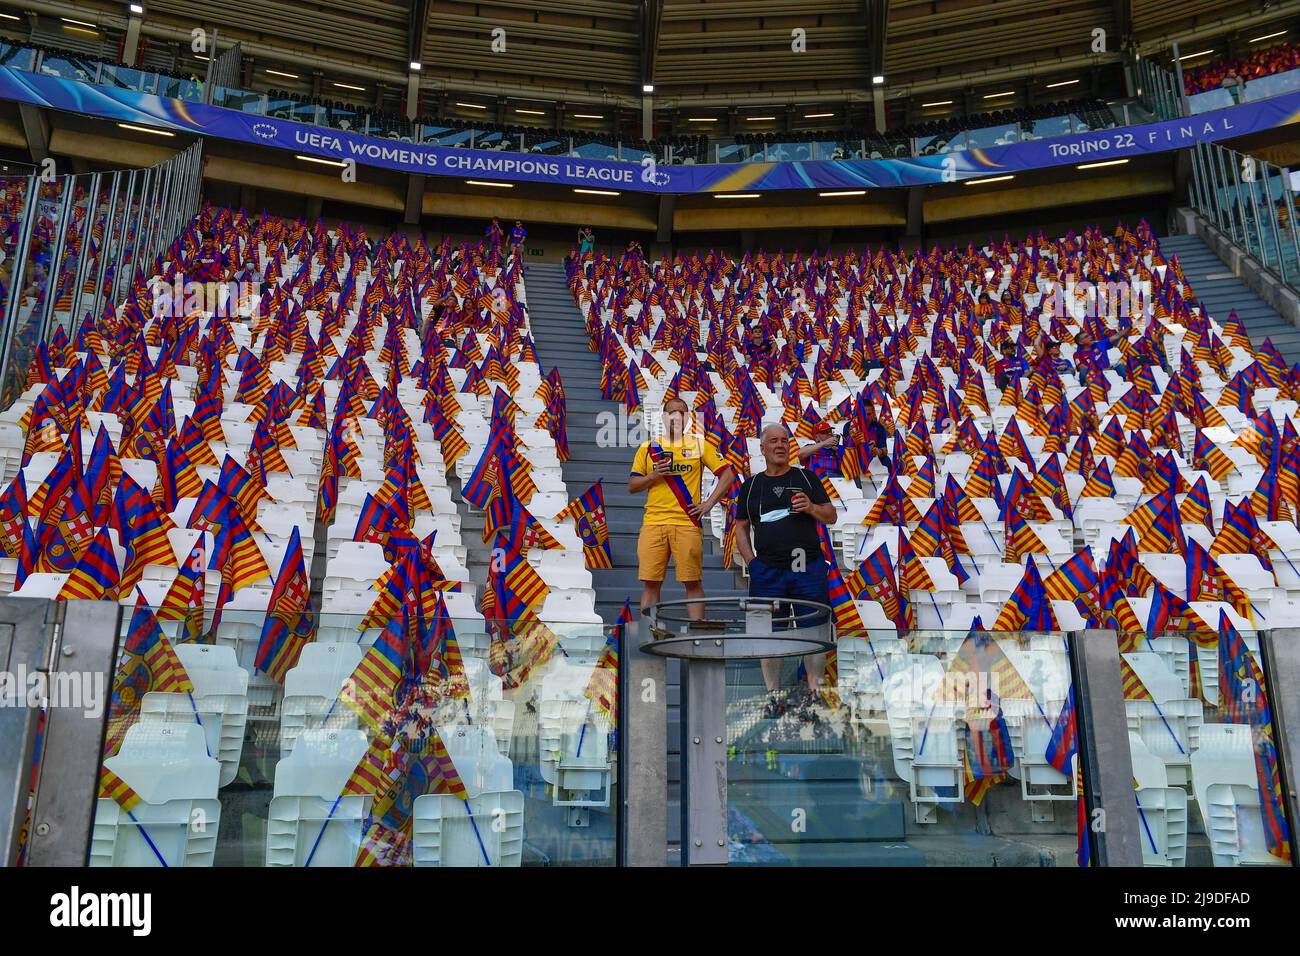 Turin, Italy. 21st, May 2022. Football fans of FC Barcelona seen preprare on the stands before the UEFA Women’s Champions League final between Barcelona and Olympique Lyon at Juventus Stadium in Turin. (Photo credit: Gonzales Photo - Tommaso Fimiano). Stock Photo